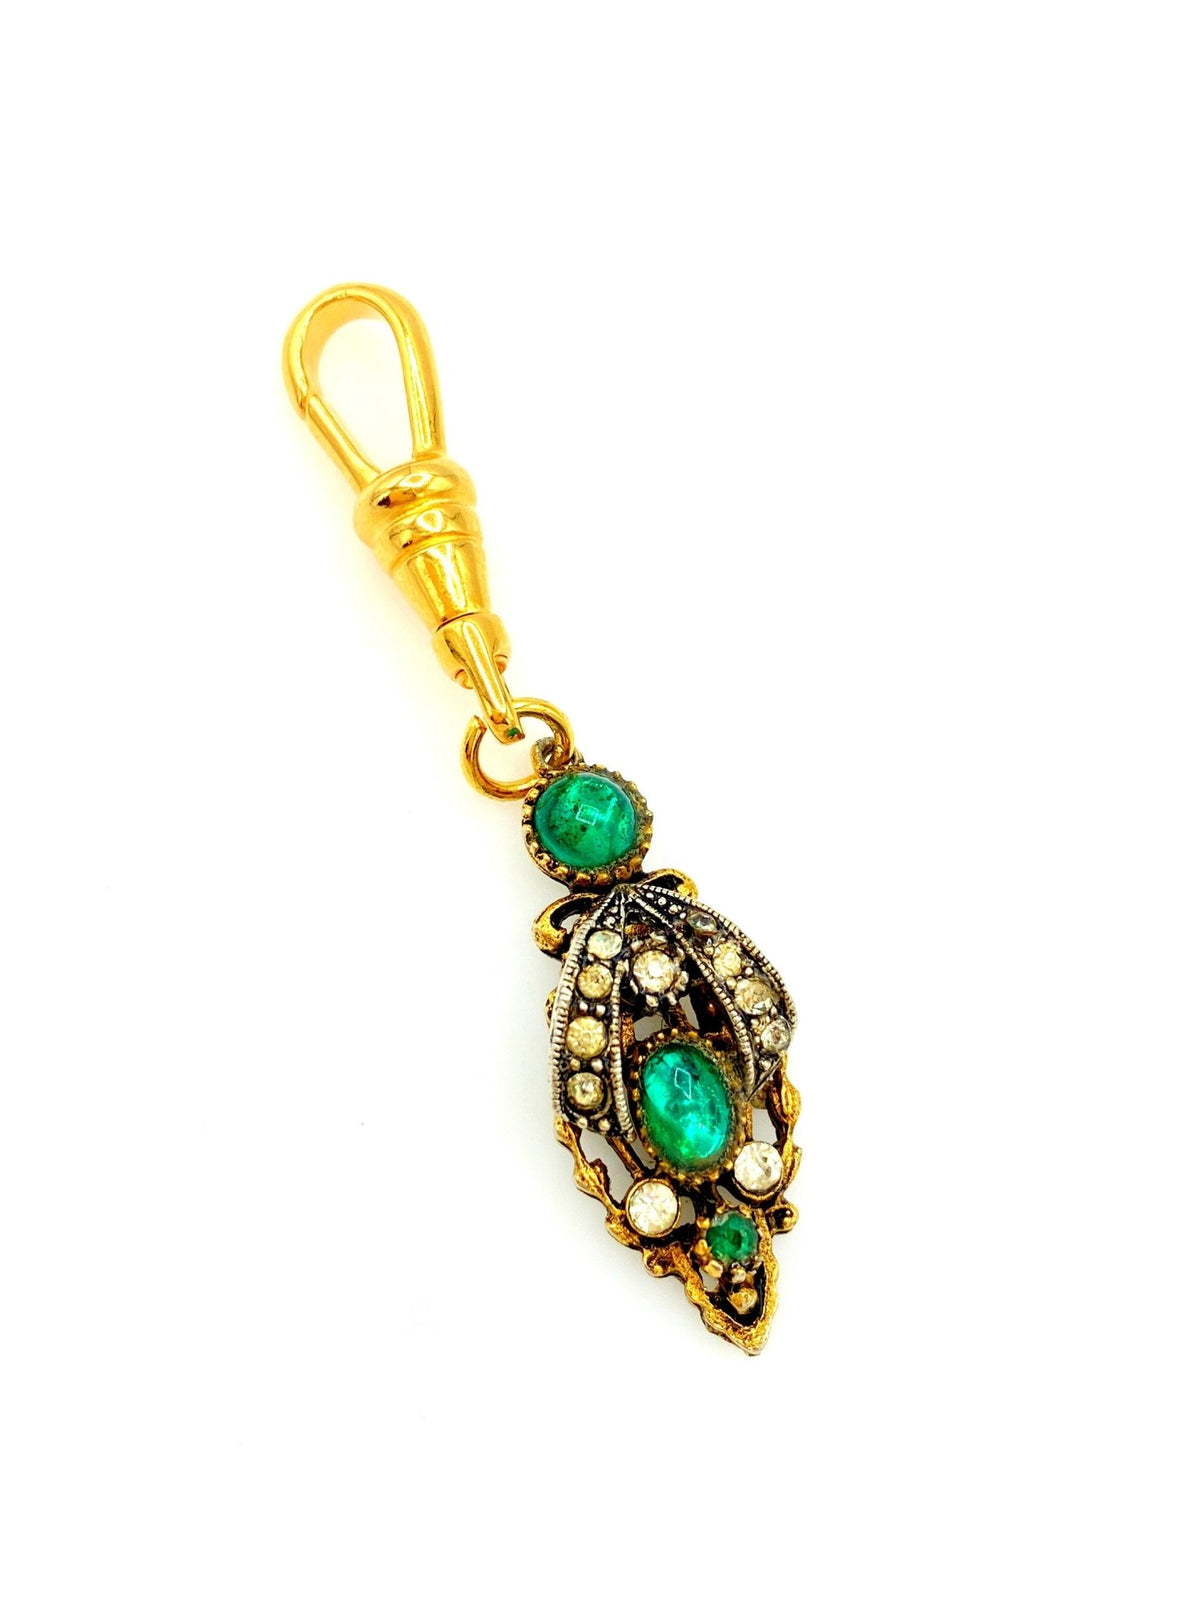 Gold & Green Rhinestone Victorian Revival Charm - 24 Wishes Vintage Jewelry